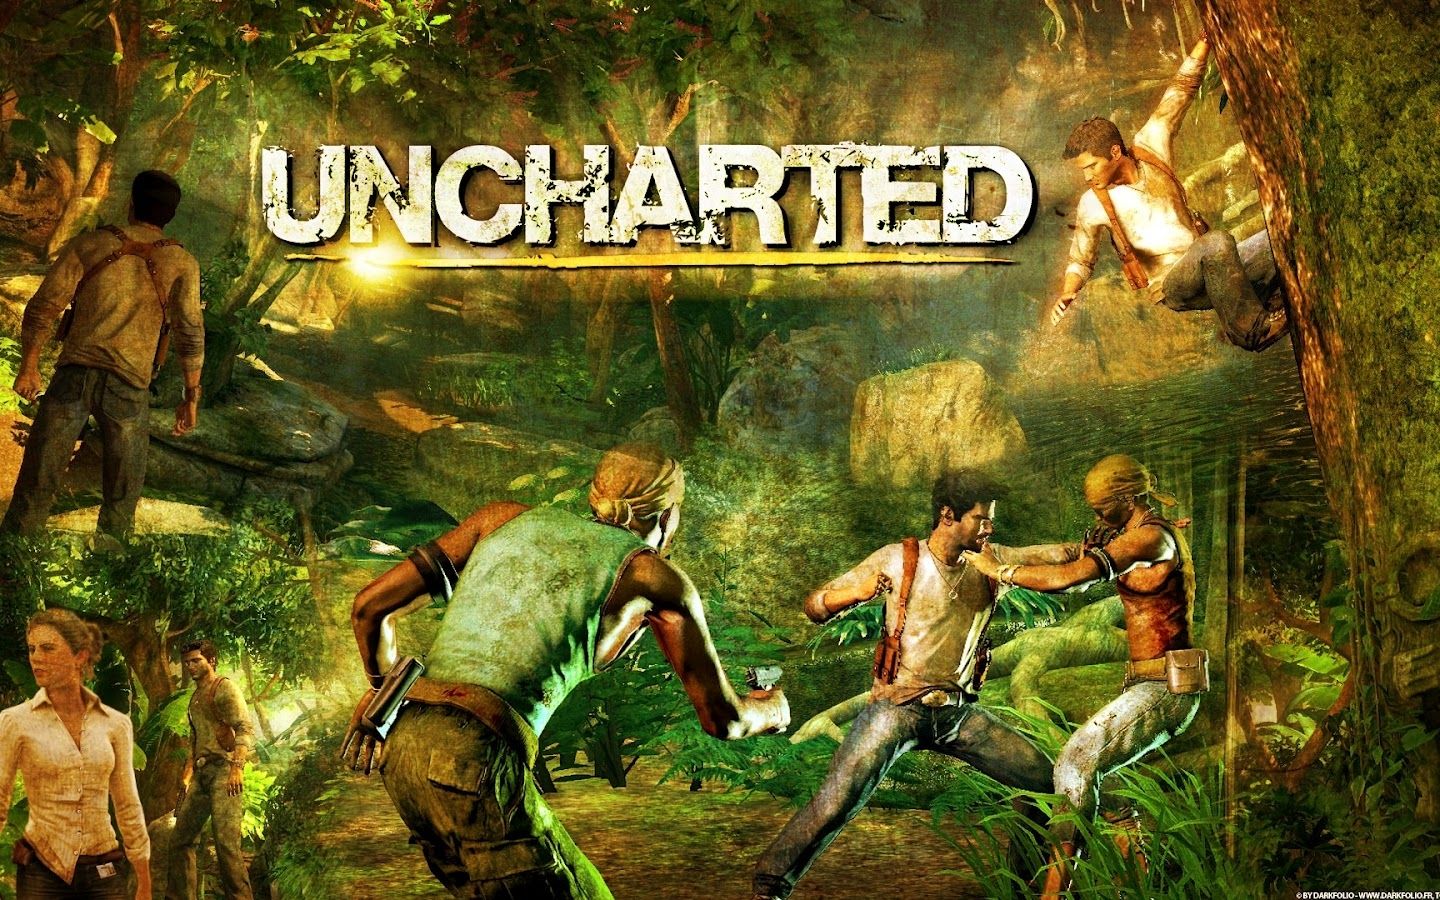 Free download Uncharted1wallpaper2 Uncharted 1 Wallpaper in HD 1080p [1600x900] for your Desktop, Mobile & Tablet. Explore Uncharted Wallpaper HD. Drake HD Wallpaper, Nathan Drake Wallpaper, Uncharted 2 Wallpaper